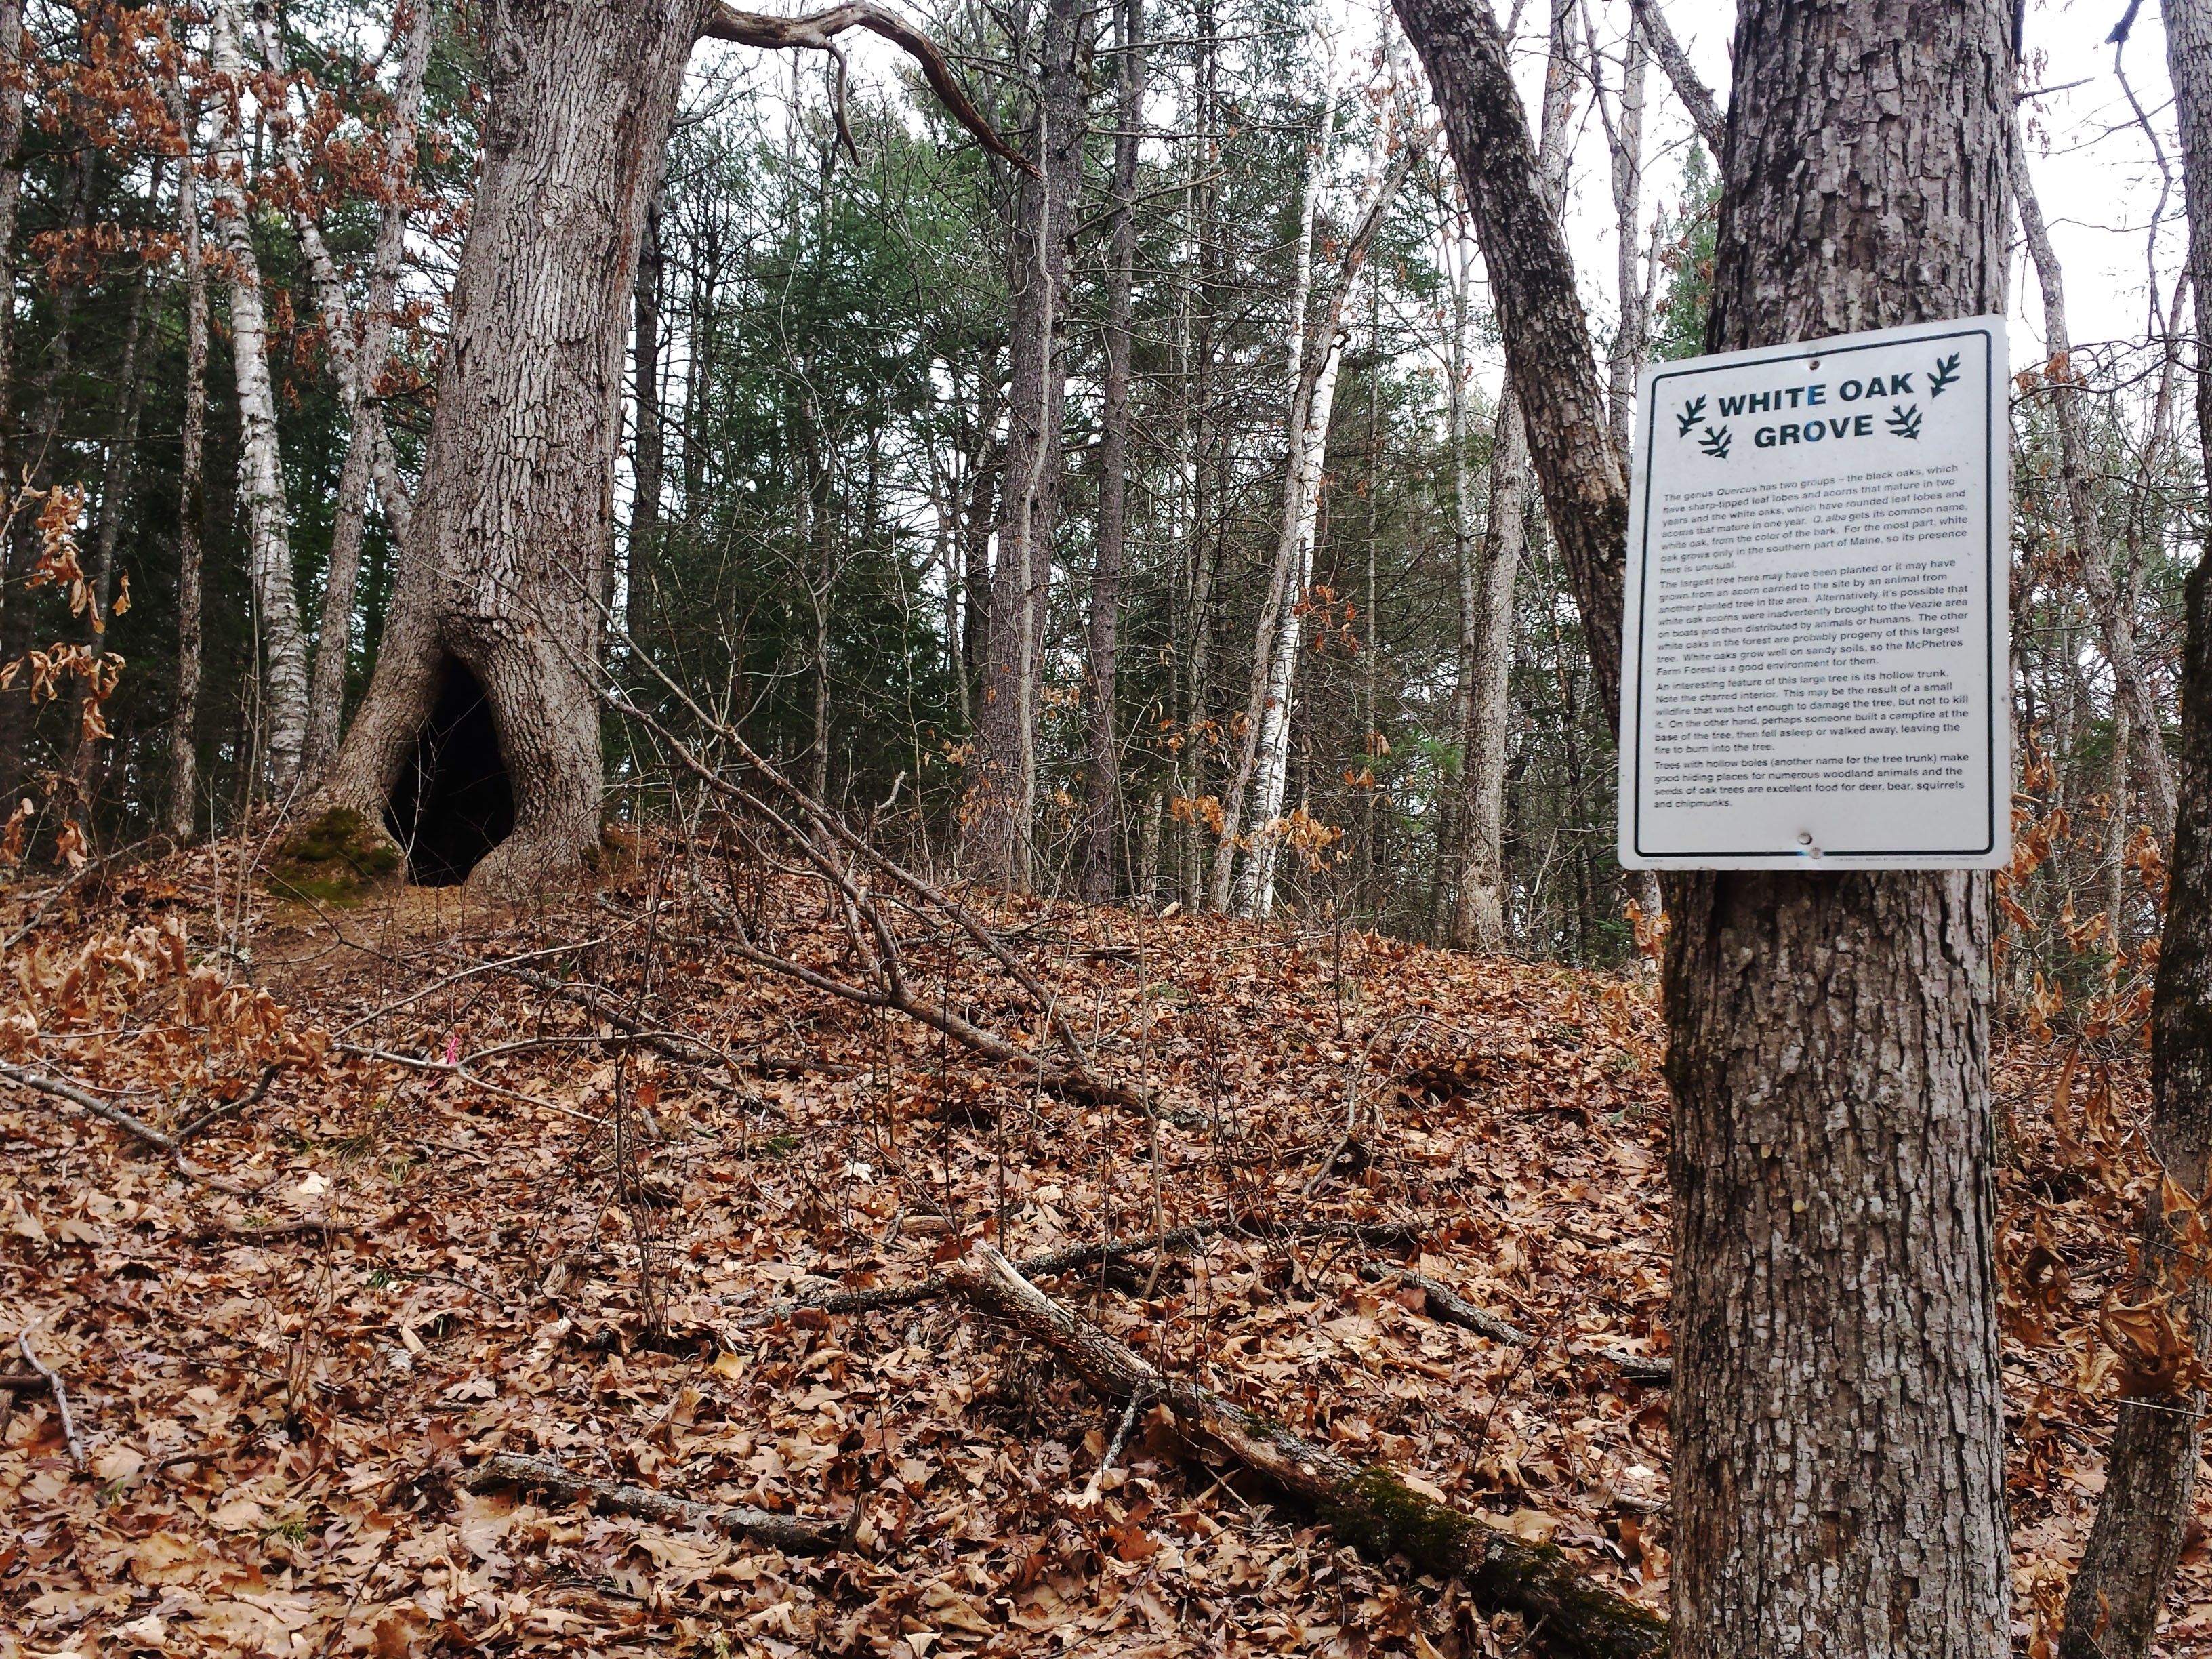 Visitors to Veazie trails can see the McPhetres Forest Farm trail, which connects to hikes in the Manter and Davis properties. This oak is a landmark on the trail.